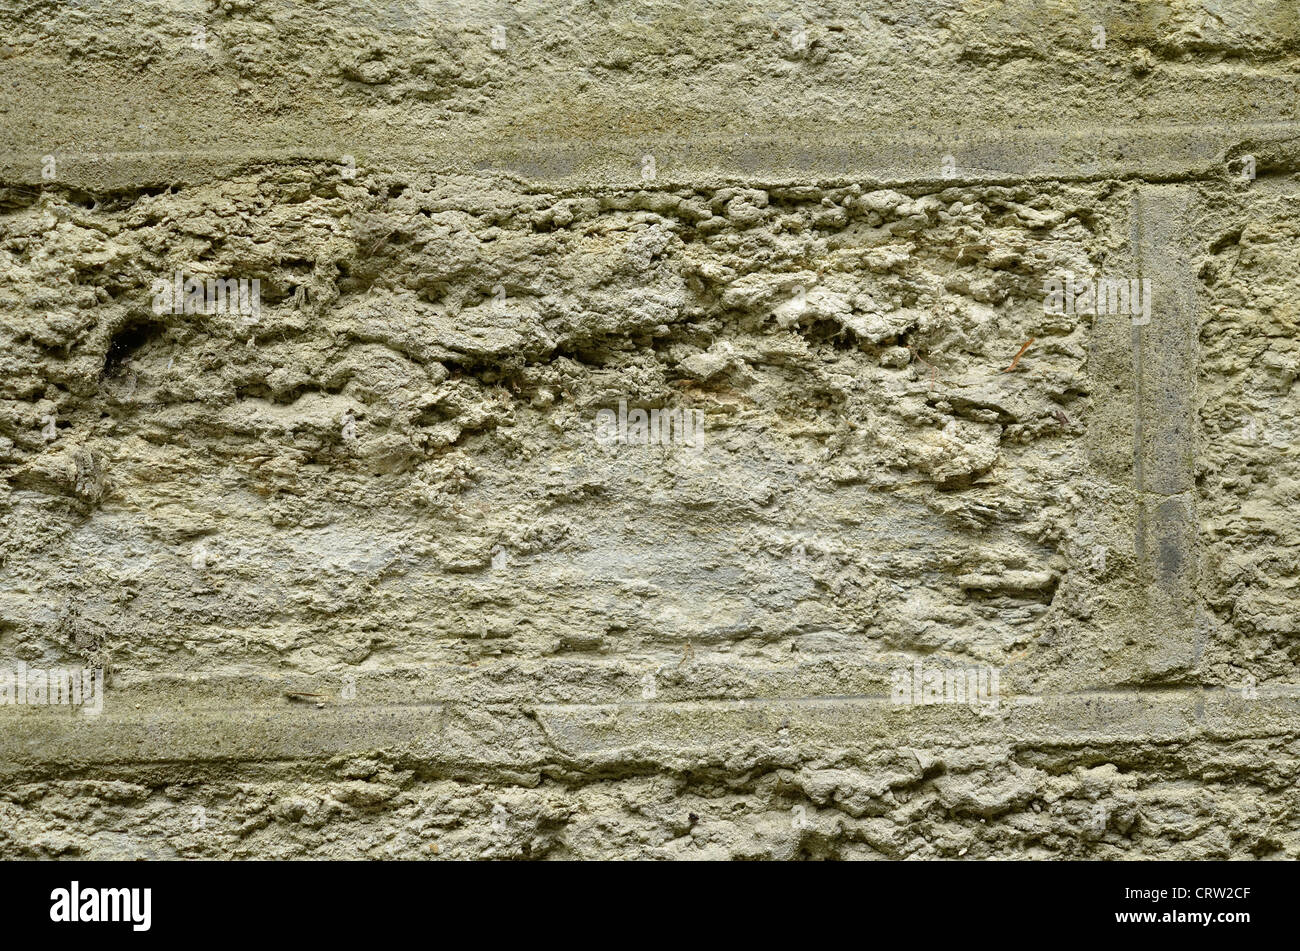 Detail of section of stone wall, showing signs of crumbling texture. Stock Photo